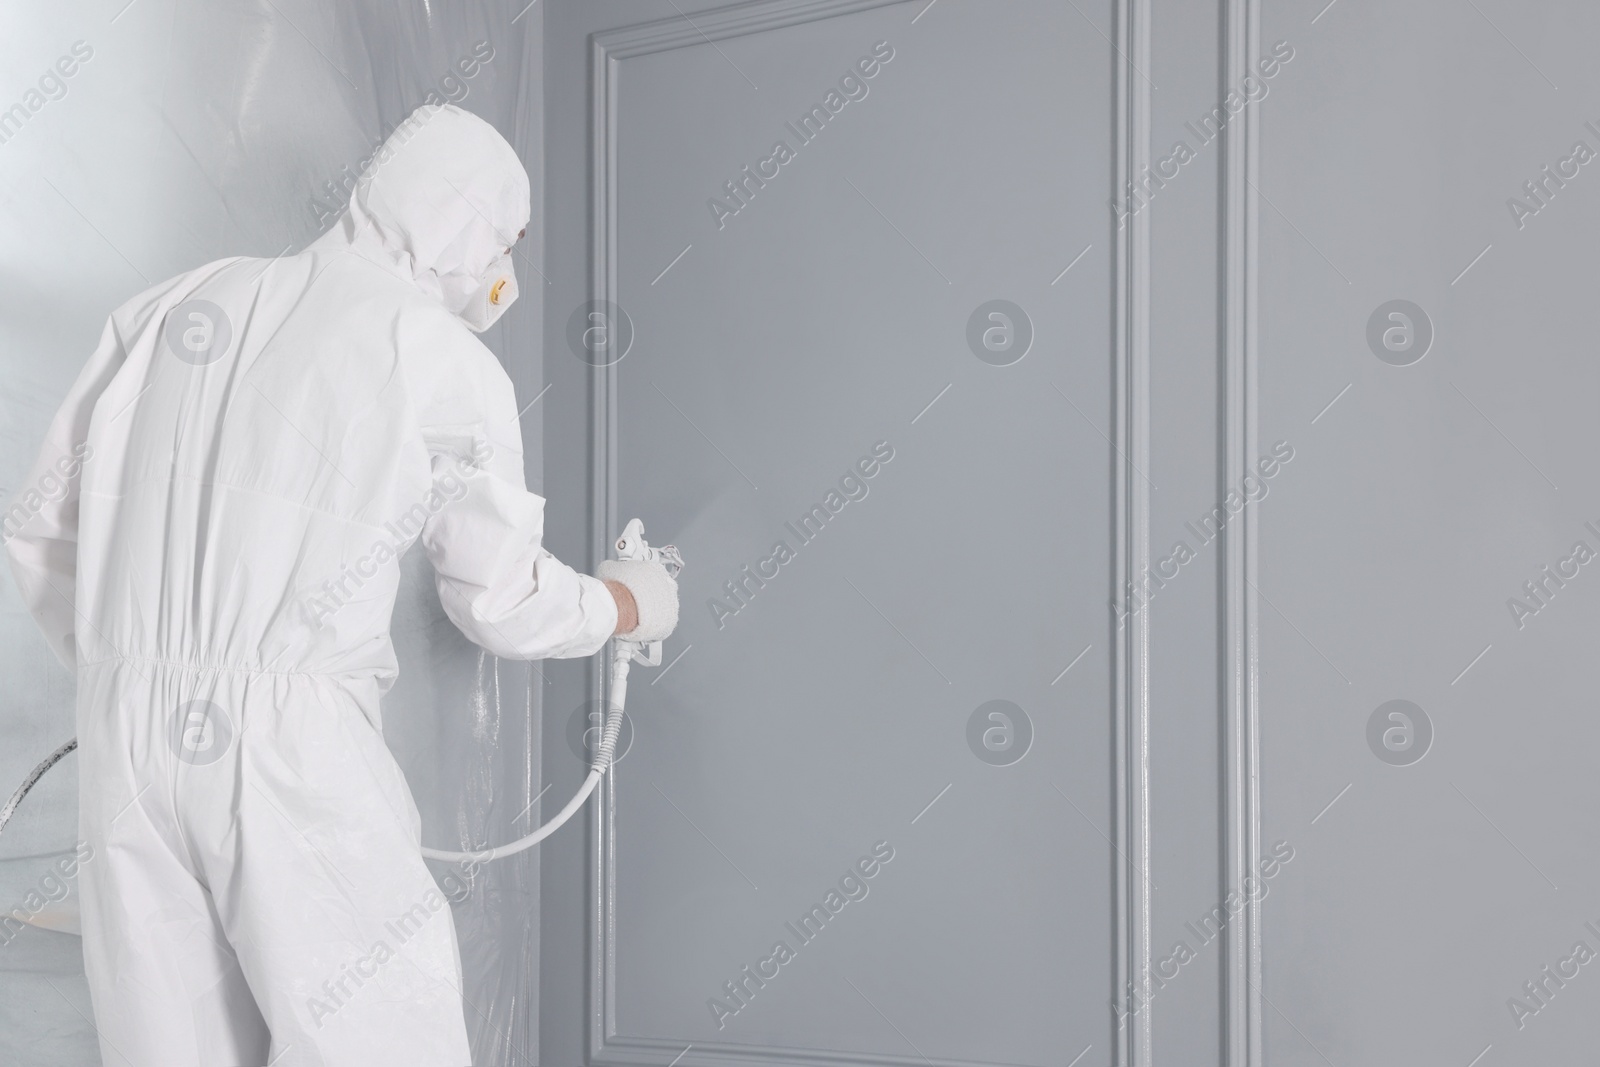 Photo of Decorator dyeing wall in grey color with spray paint, back view